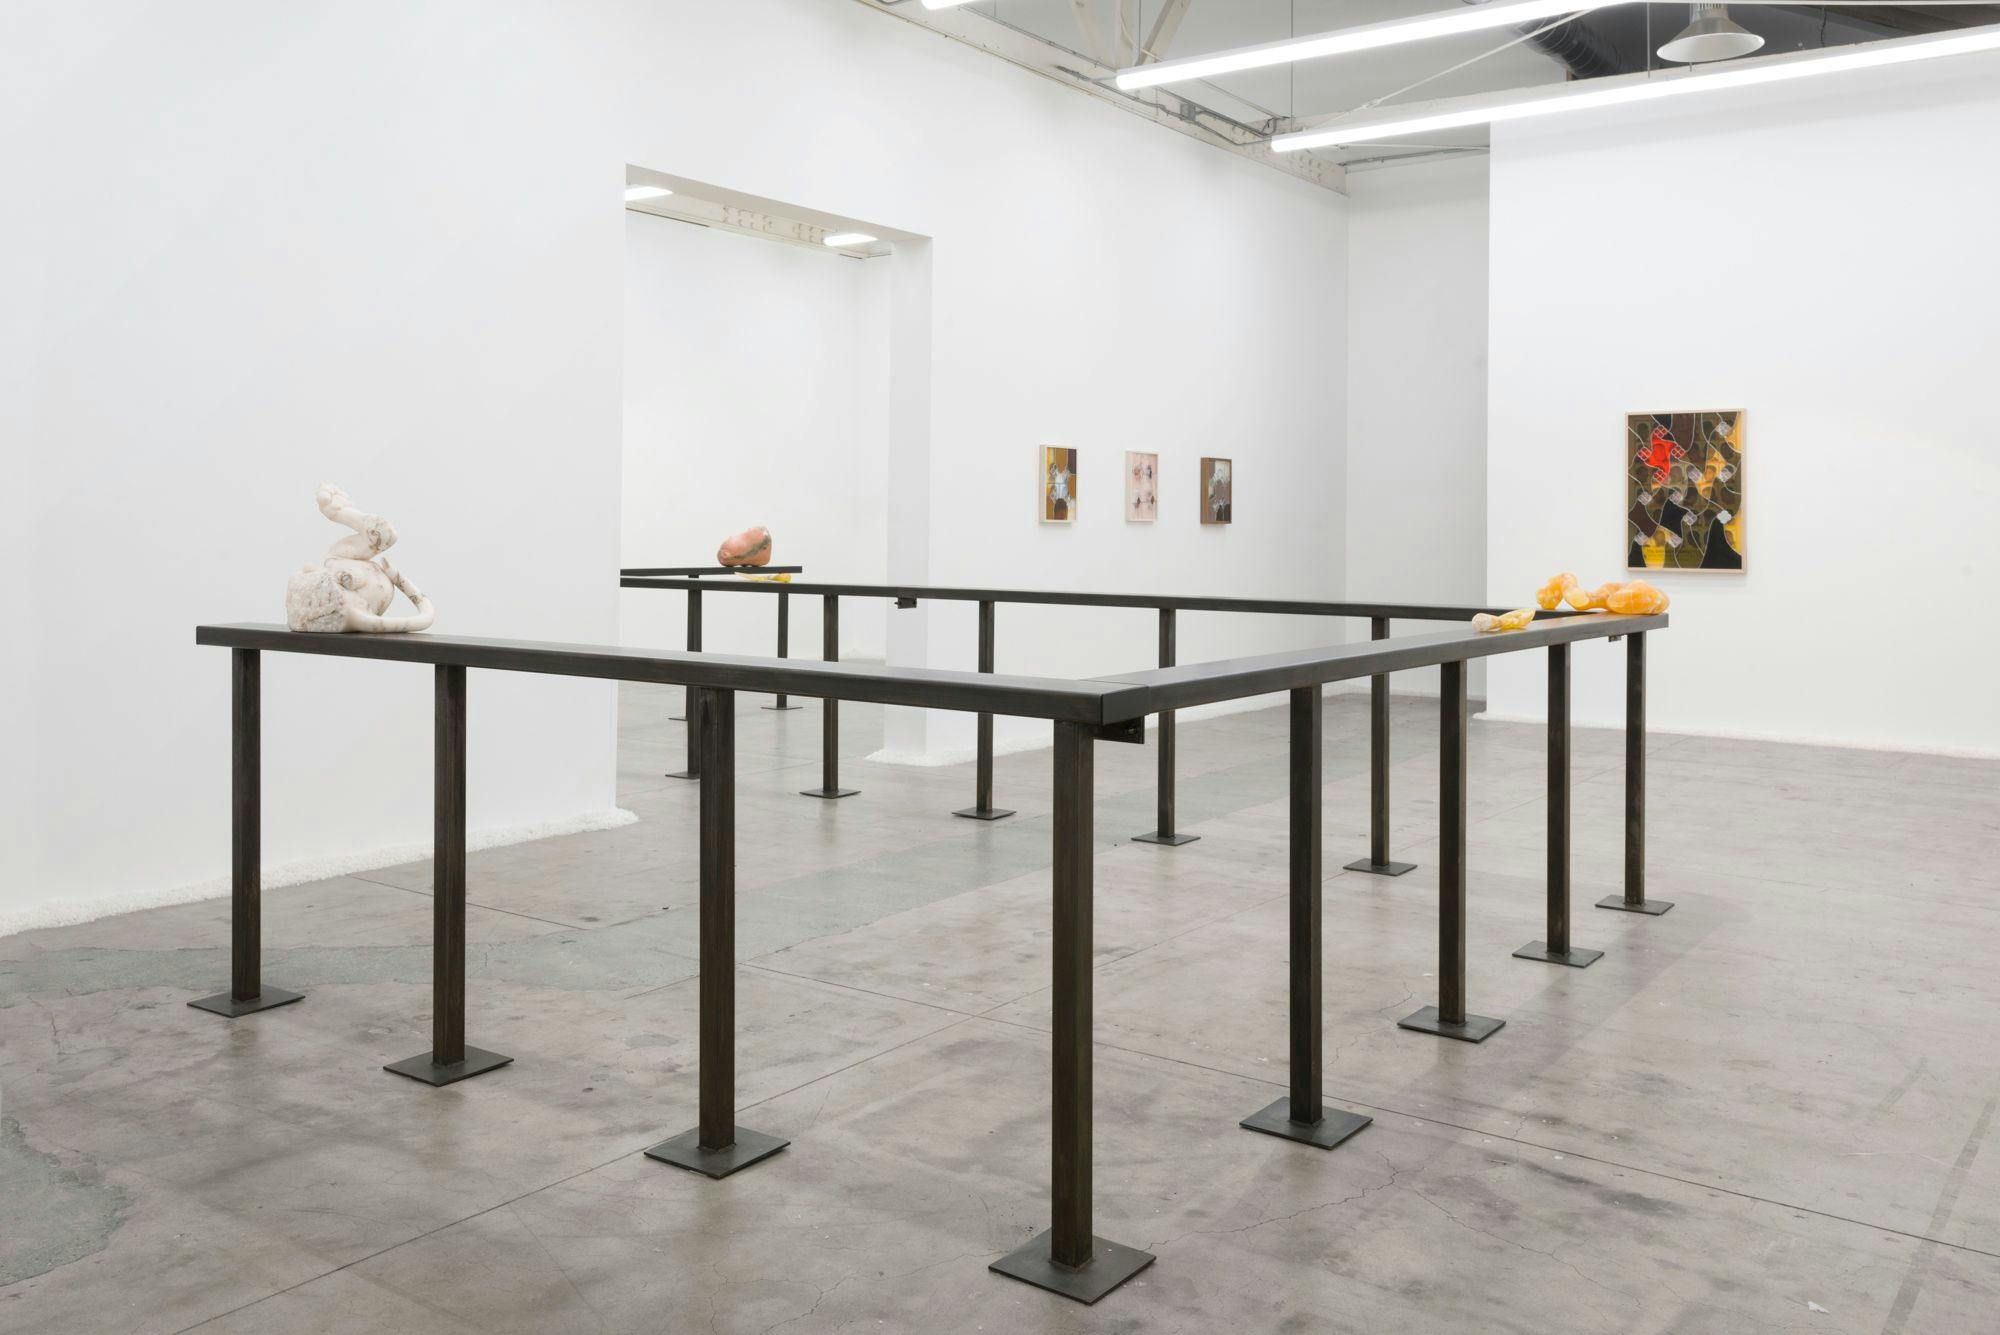 Installation view of